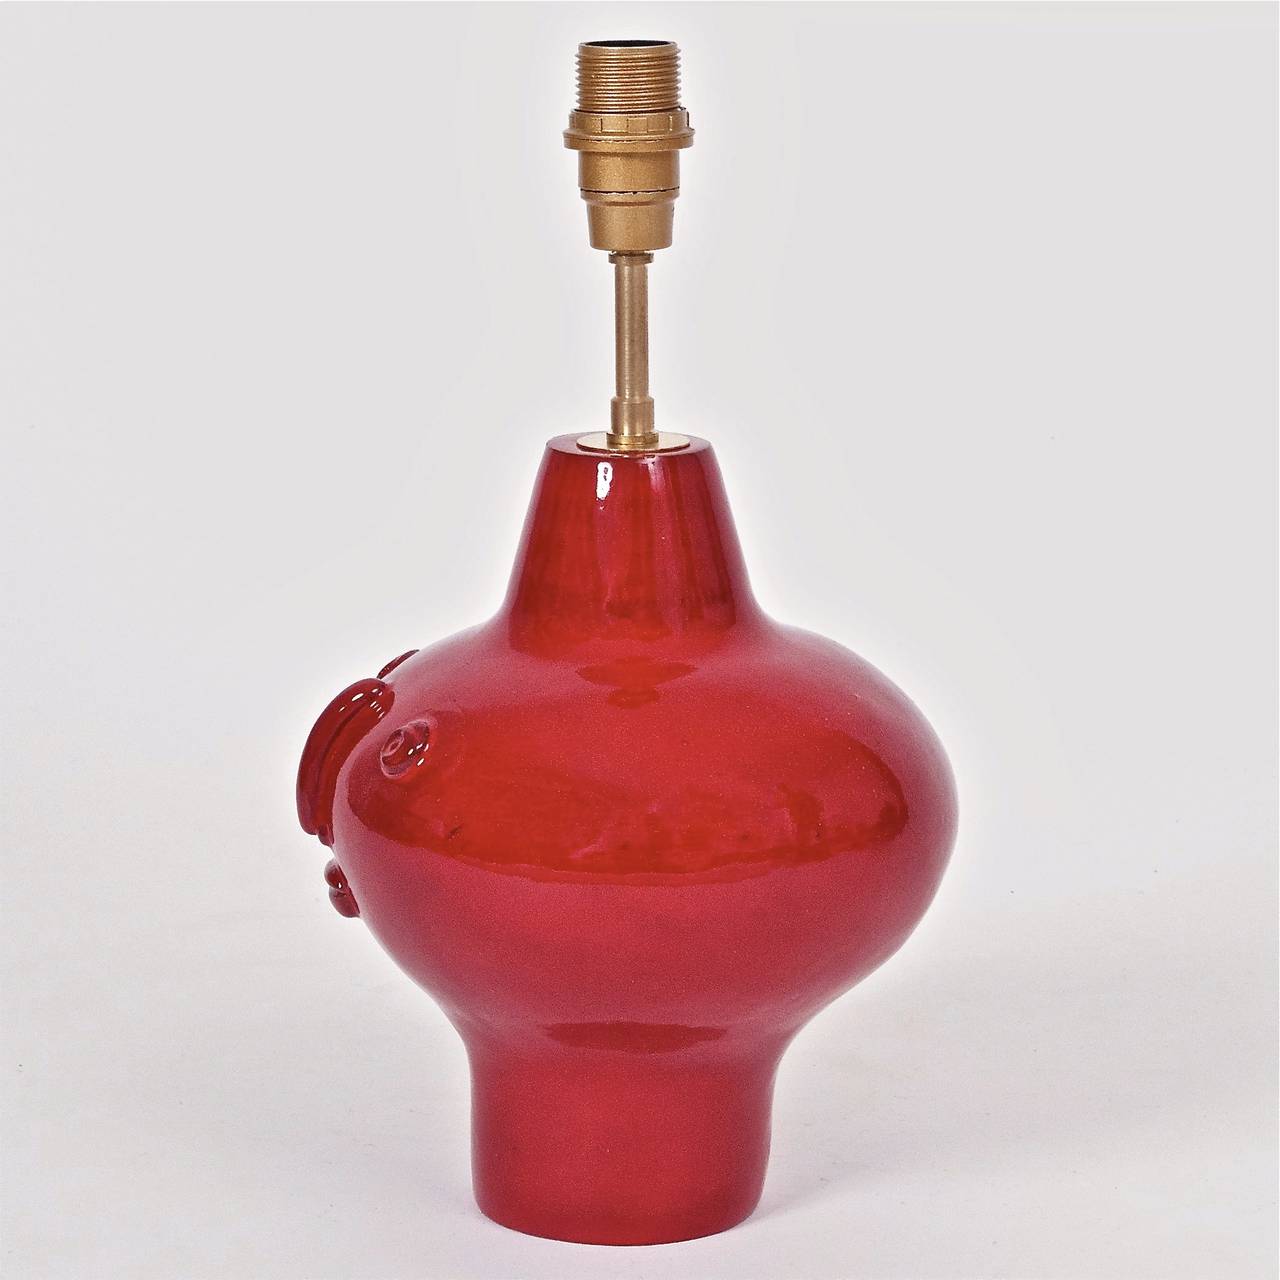 Mid-Century Modern Pair of Red Ceramic Biomorphic Lamp Bases Signed by DaLo For Sale